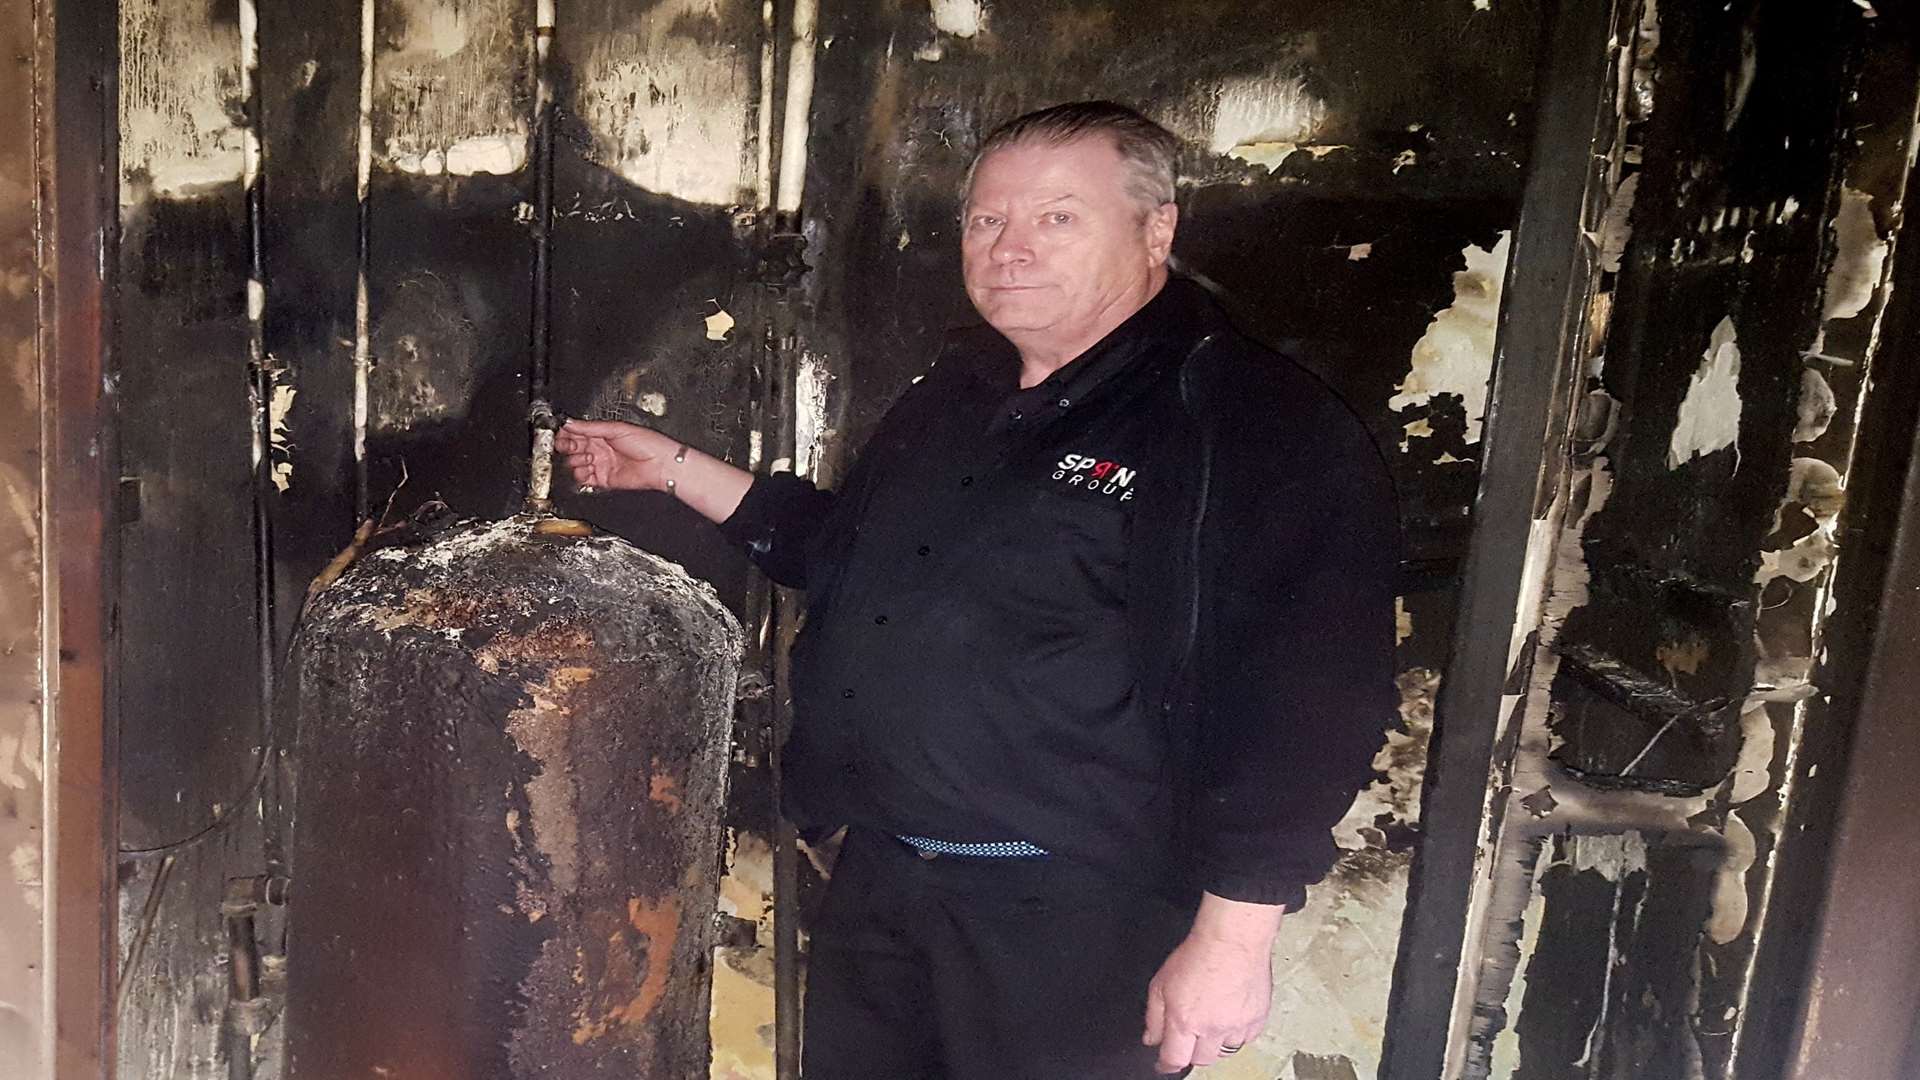 Keith Plews with the burnt airing cupboard and emersion heater where the fire is thought to have started